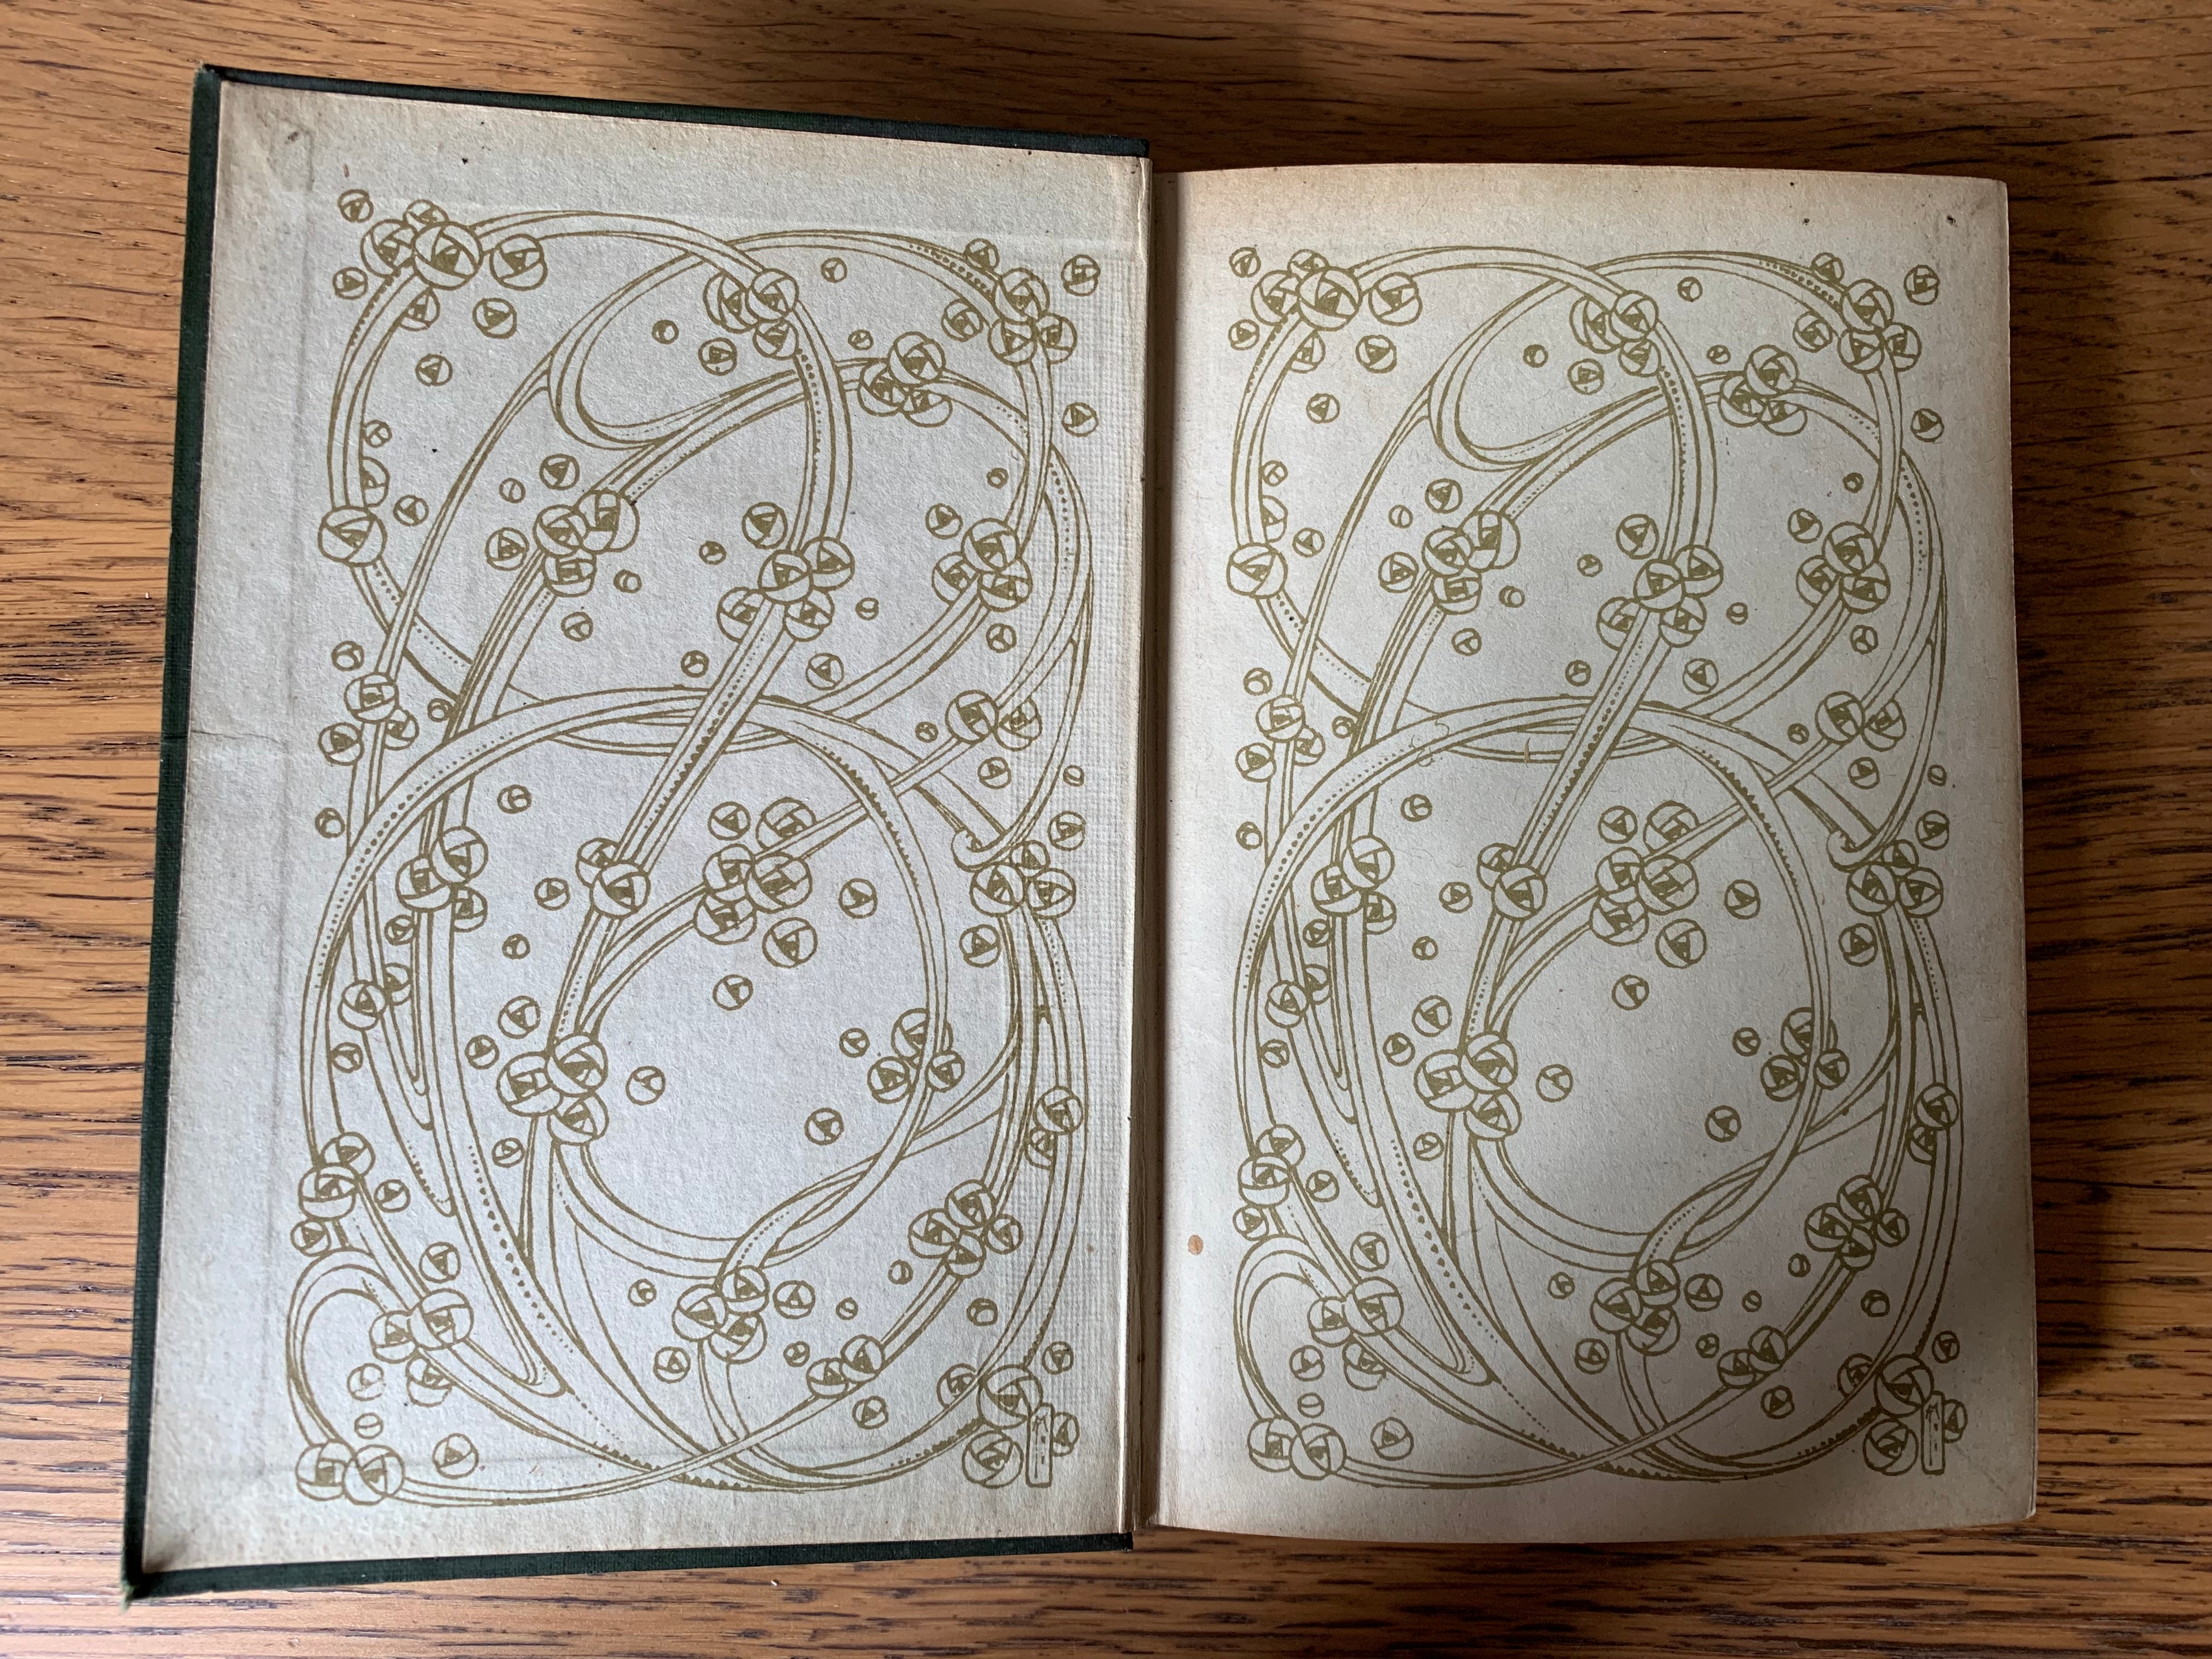 Endpapers of the book